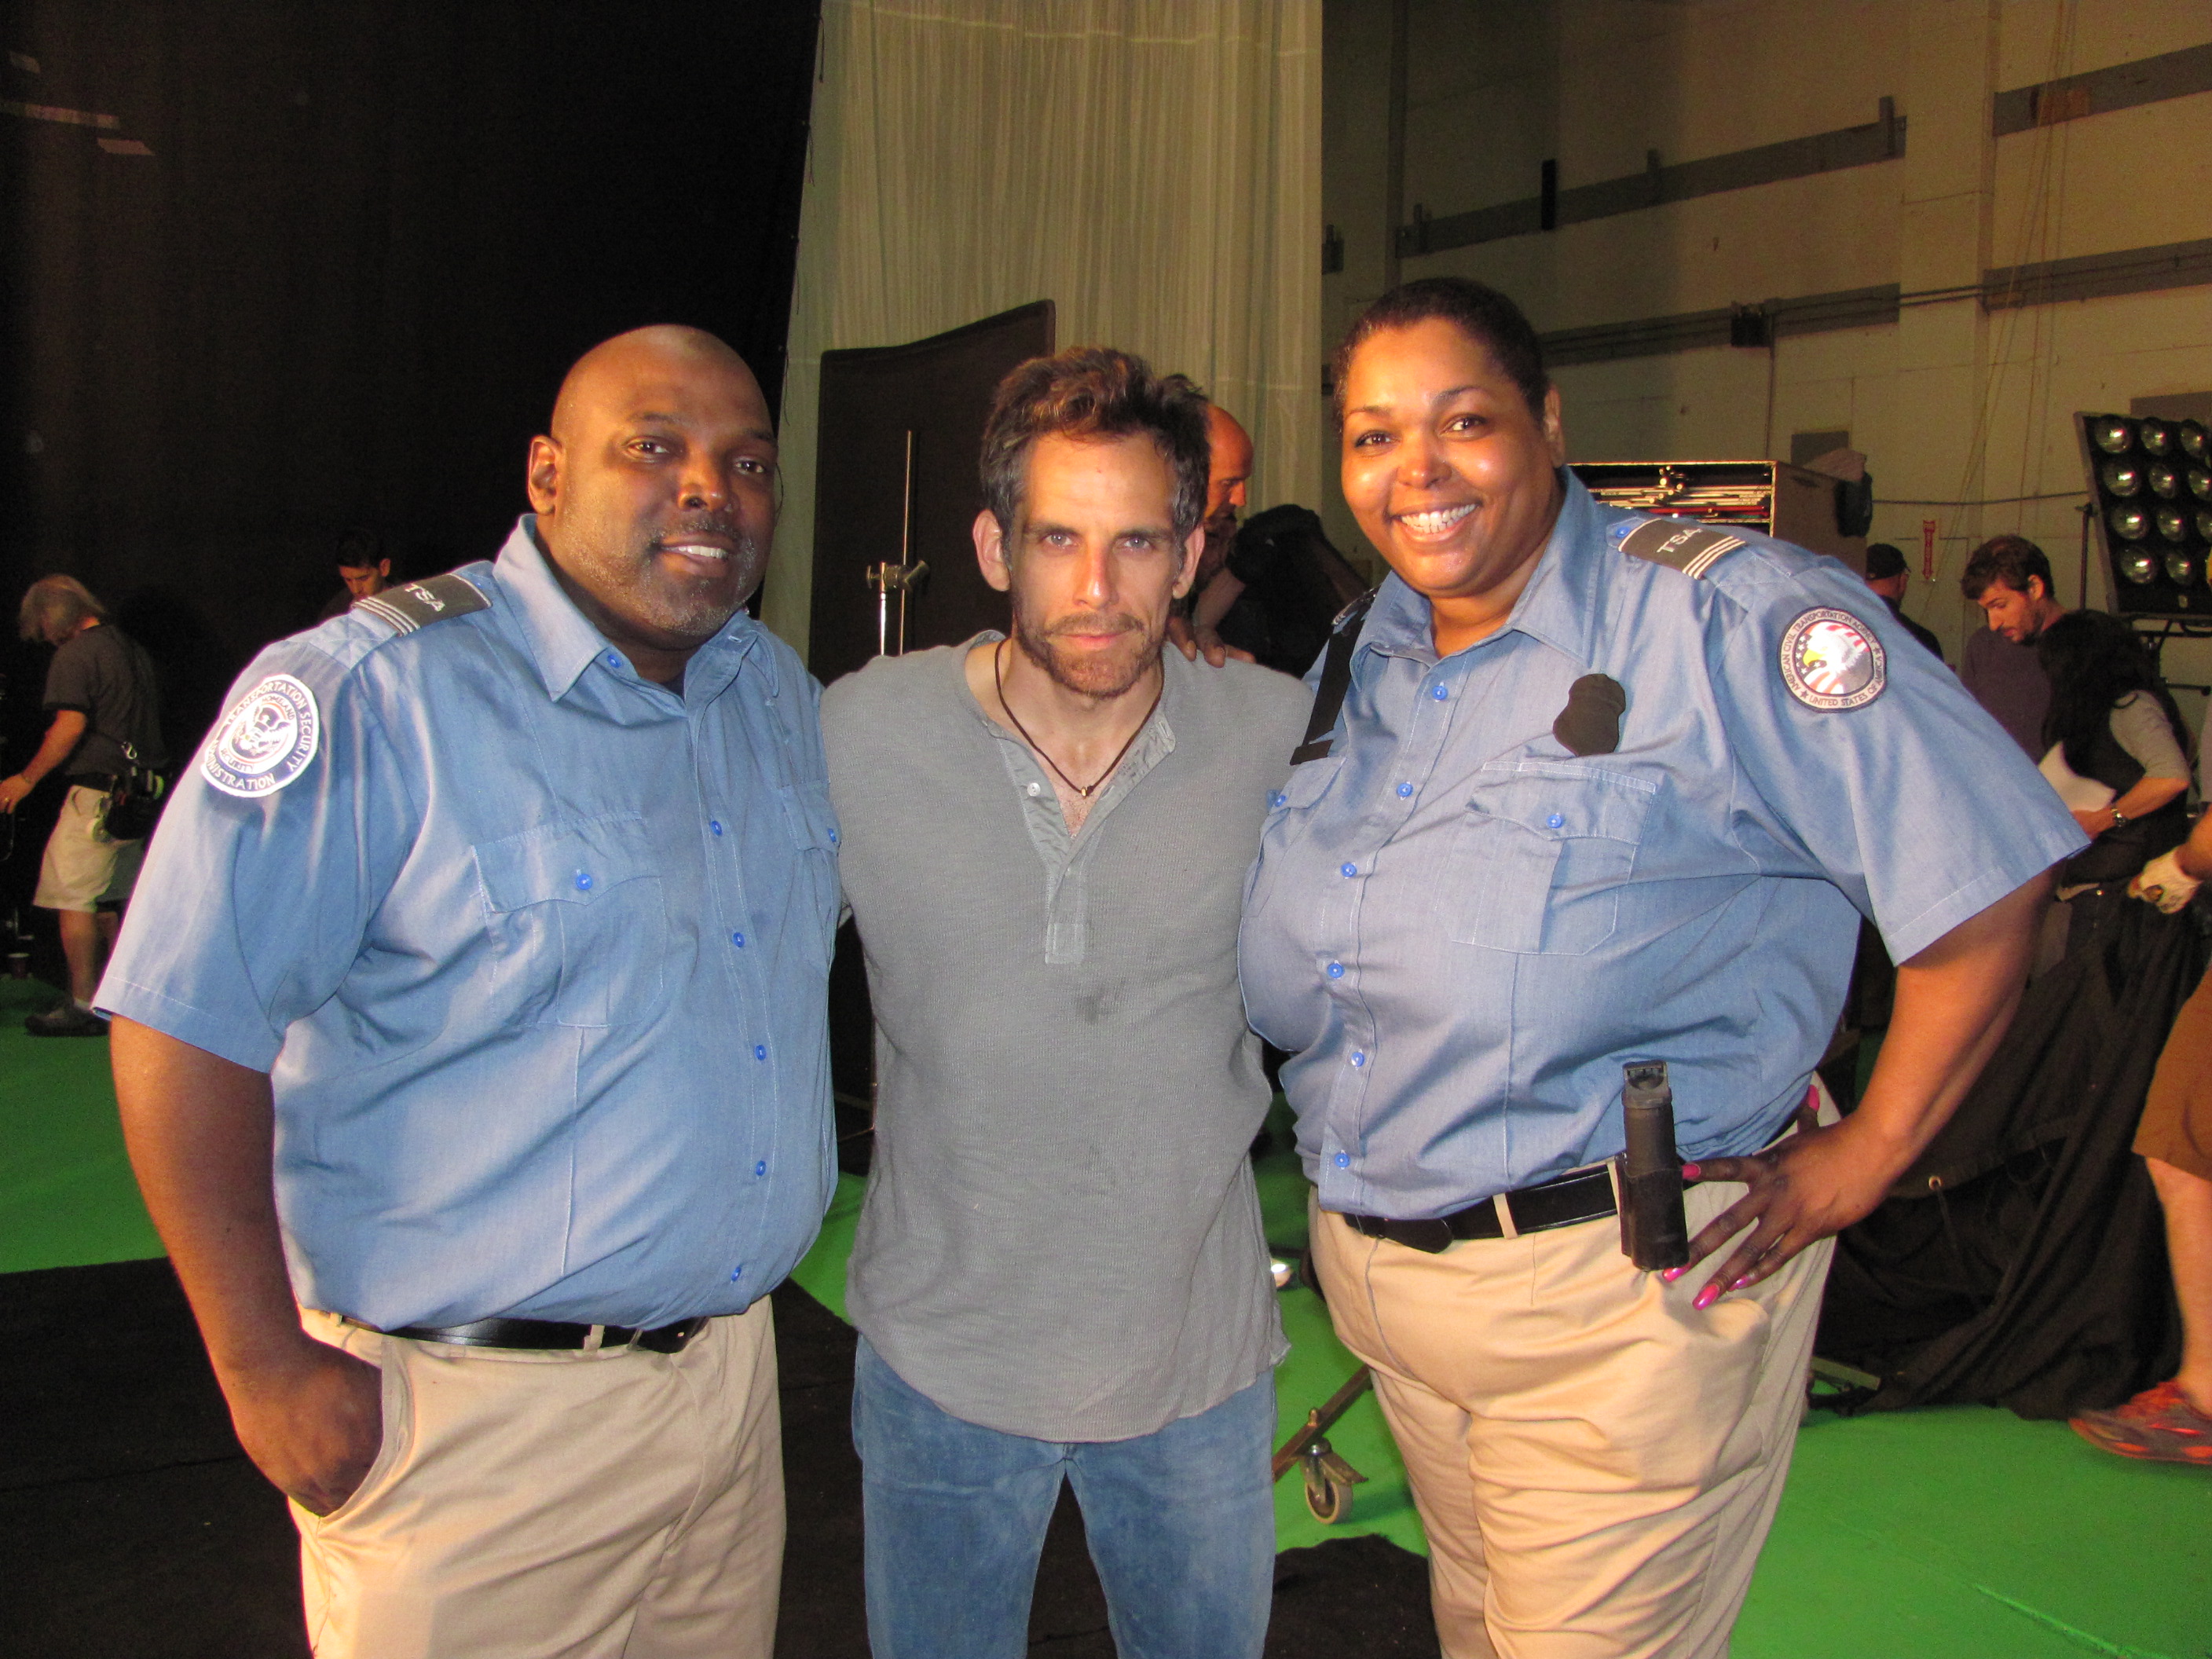 Walter M., Ben Stiller and Liz on the set of The Secret Life Of Walter Mitty